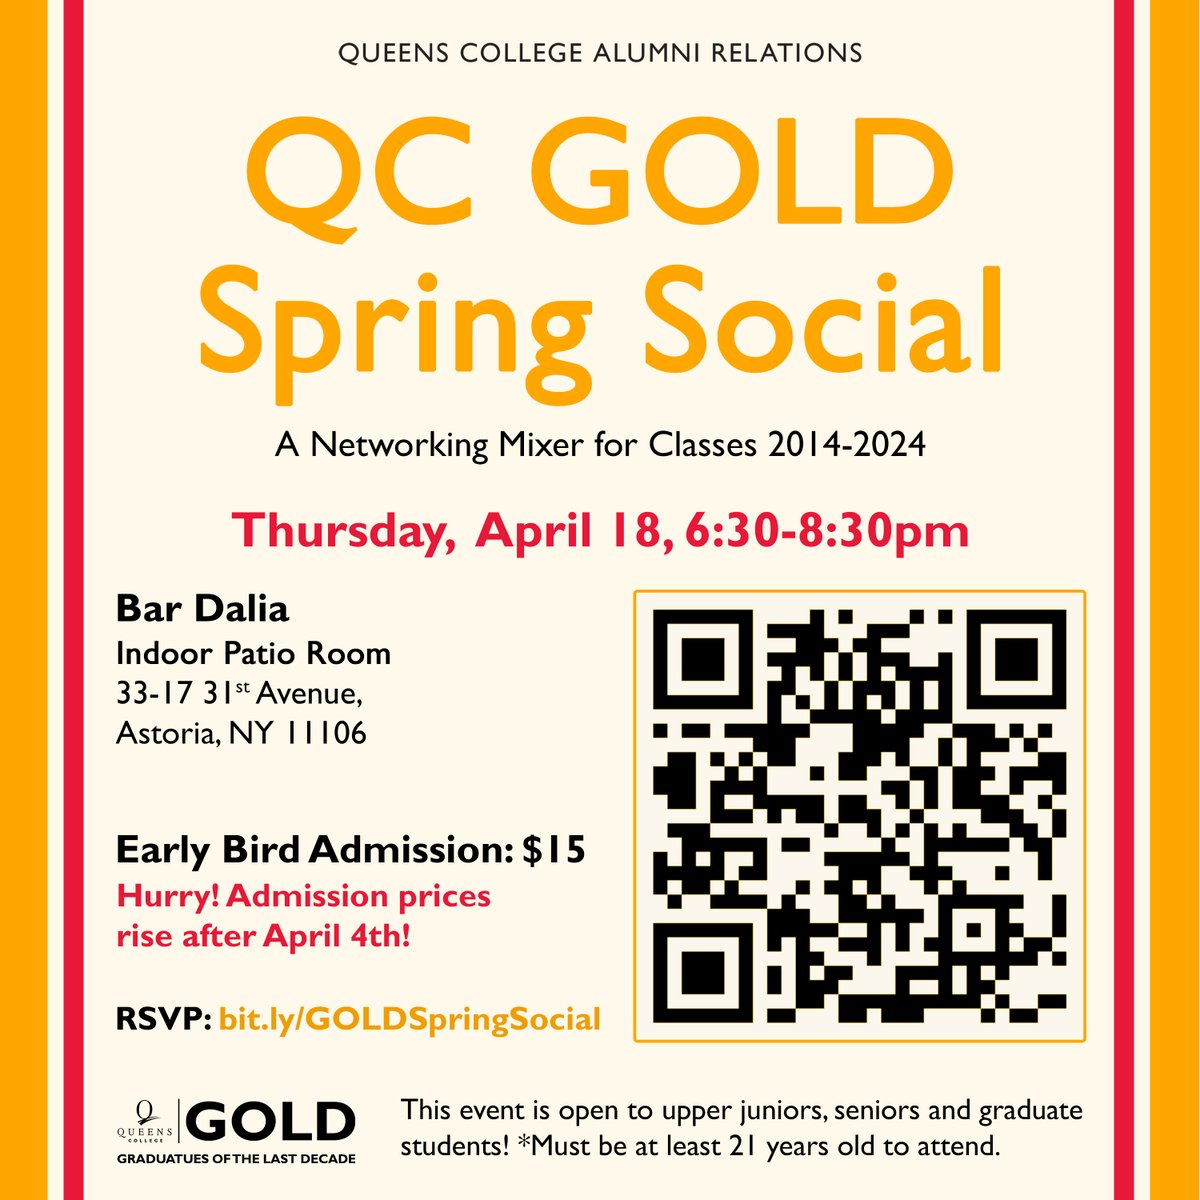 Hurry! Don't miss out on the unforgettable #QCGOLD Spring Social at Bar Dalia on Thurs, 4/18 @ 6:30pm! Secure your spot with a 40% OFF Early Bird Special ($15). RSVP by this Thurs, 4/4: bit.ly/GOLDSpringSoci… Must be 21+ to attend✨See you there! #queenscollege #qcalumni